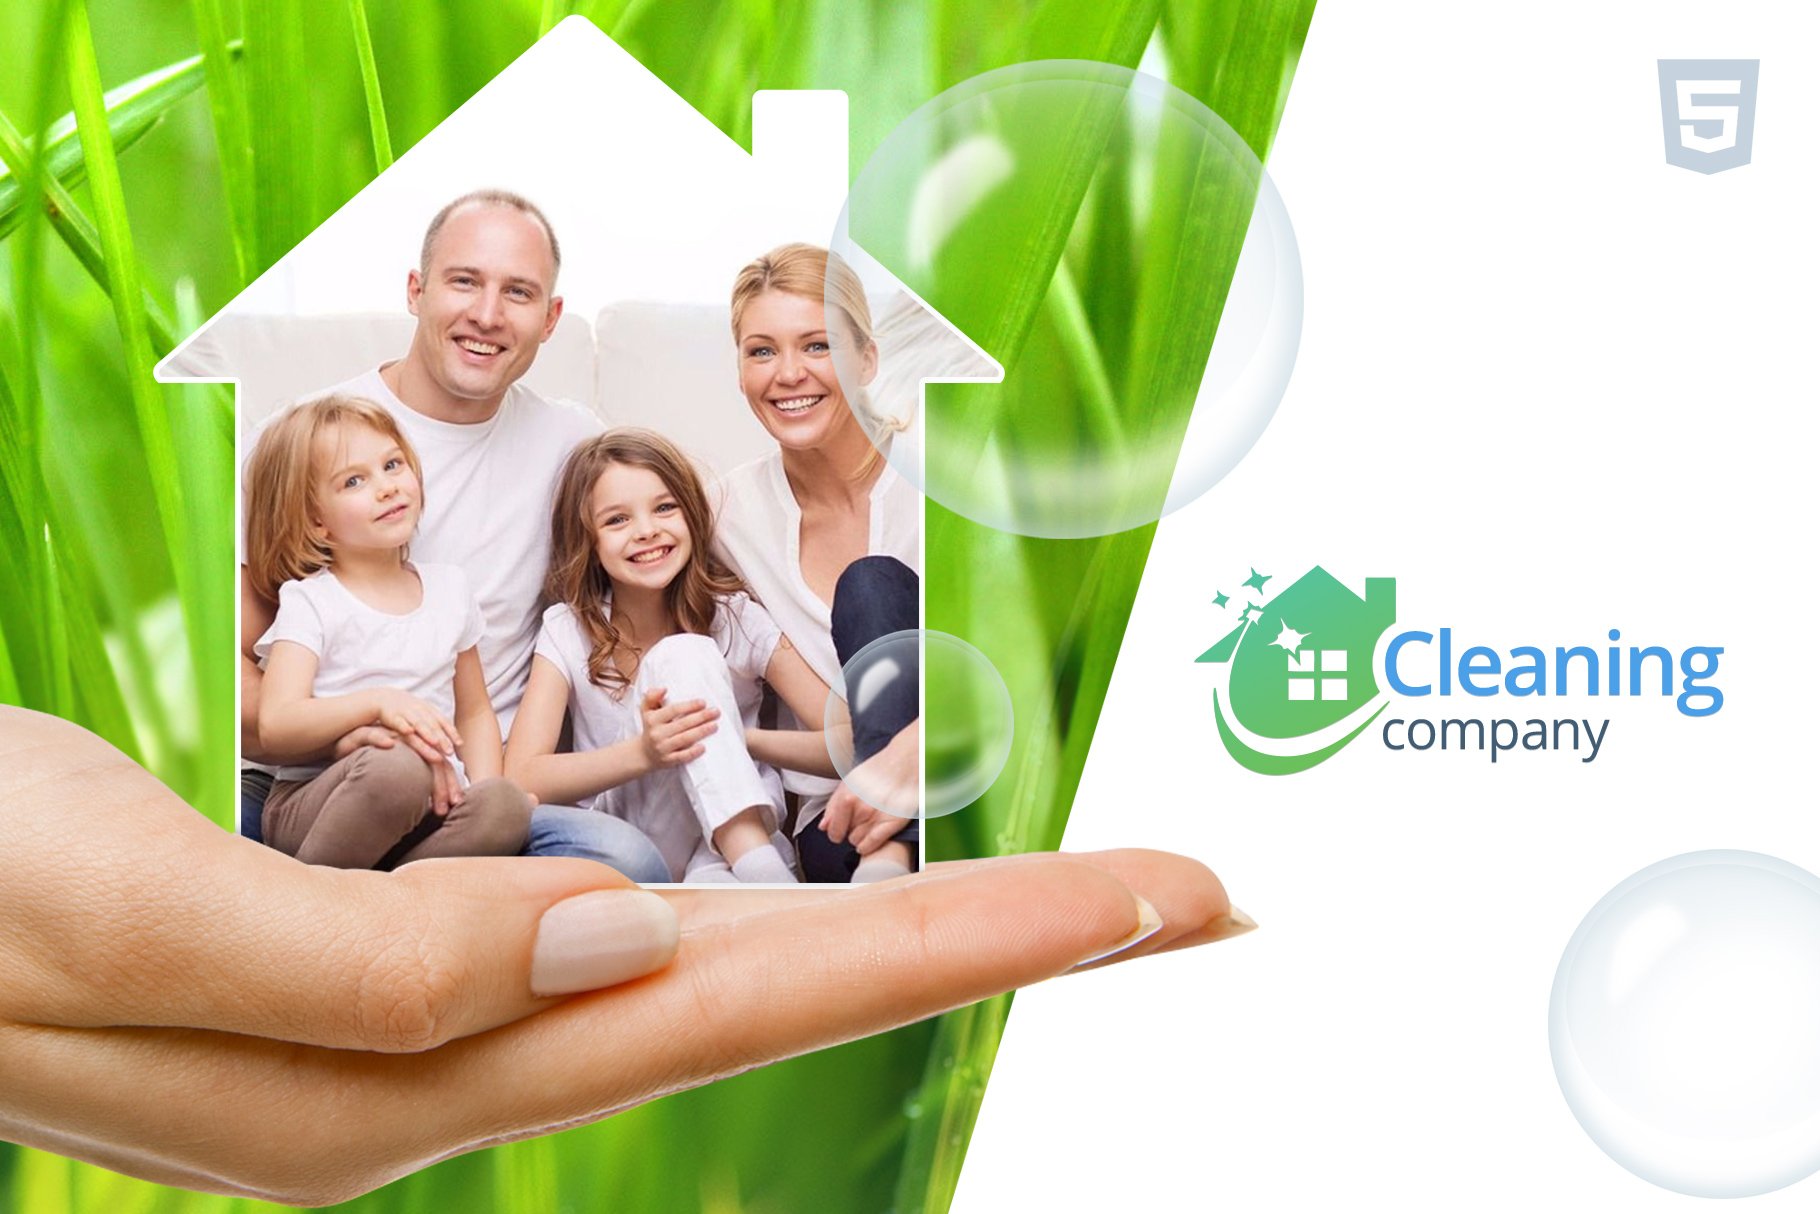 Cleaning Services HTML template cover image.